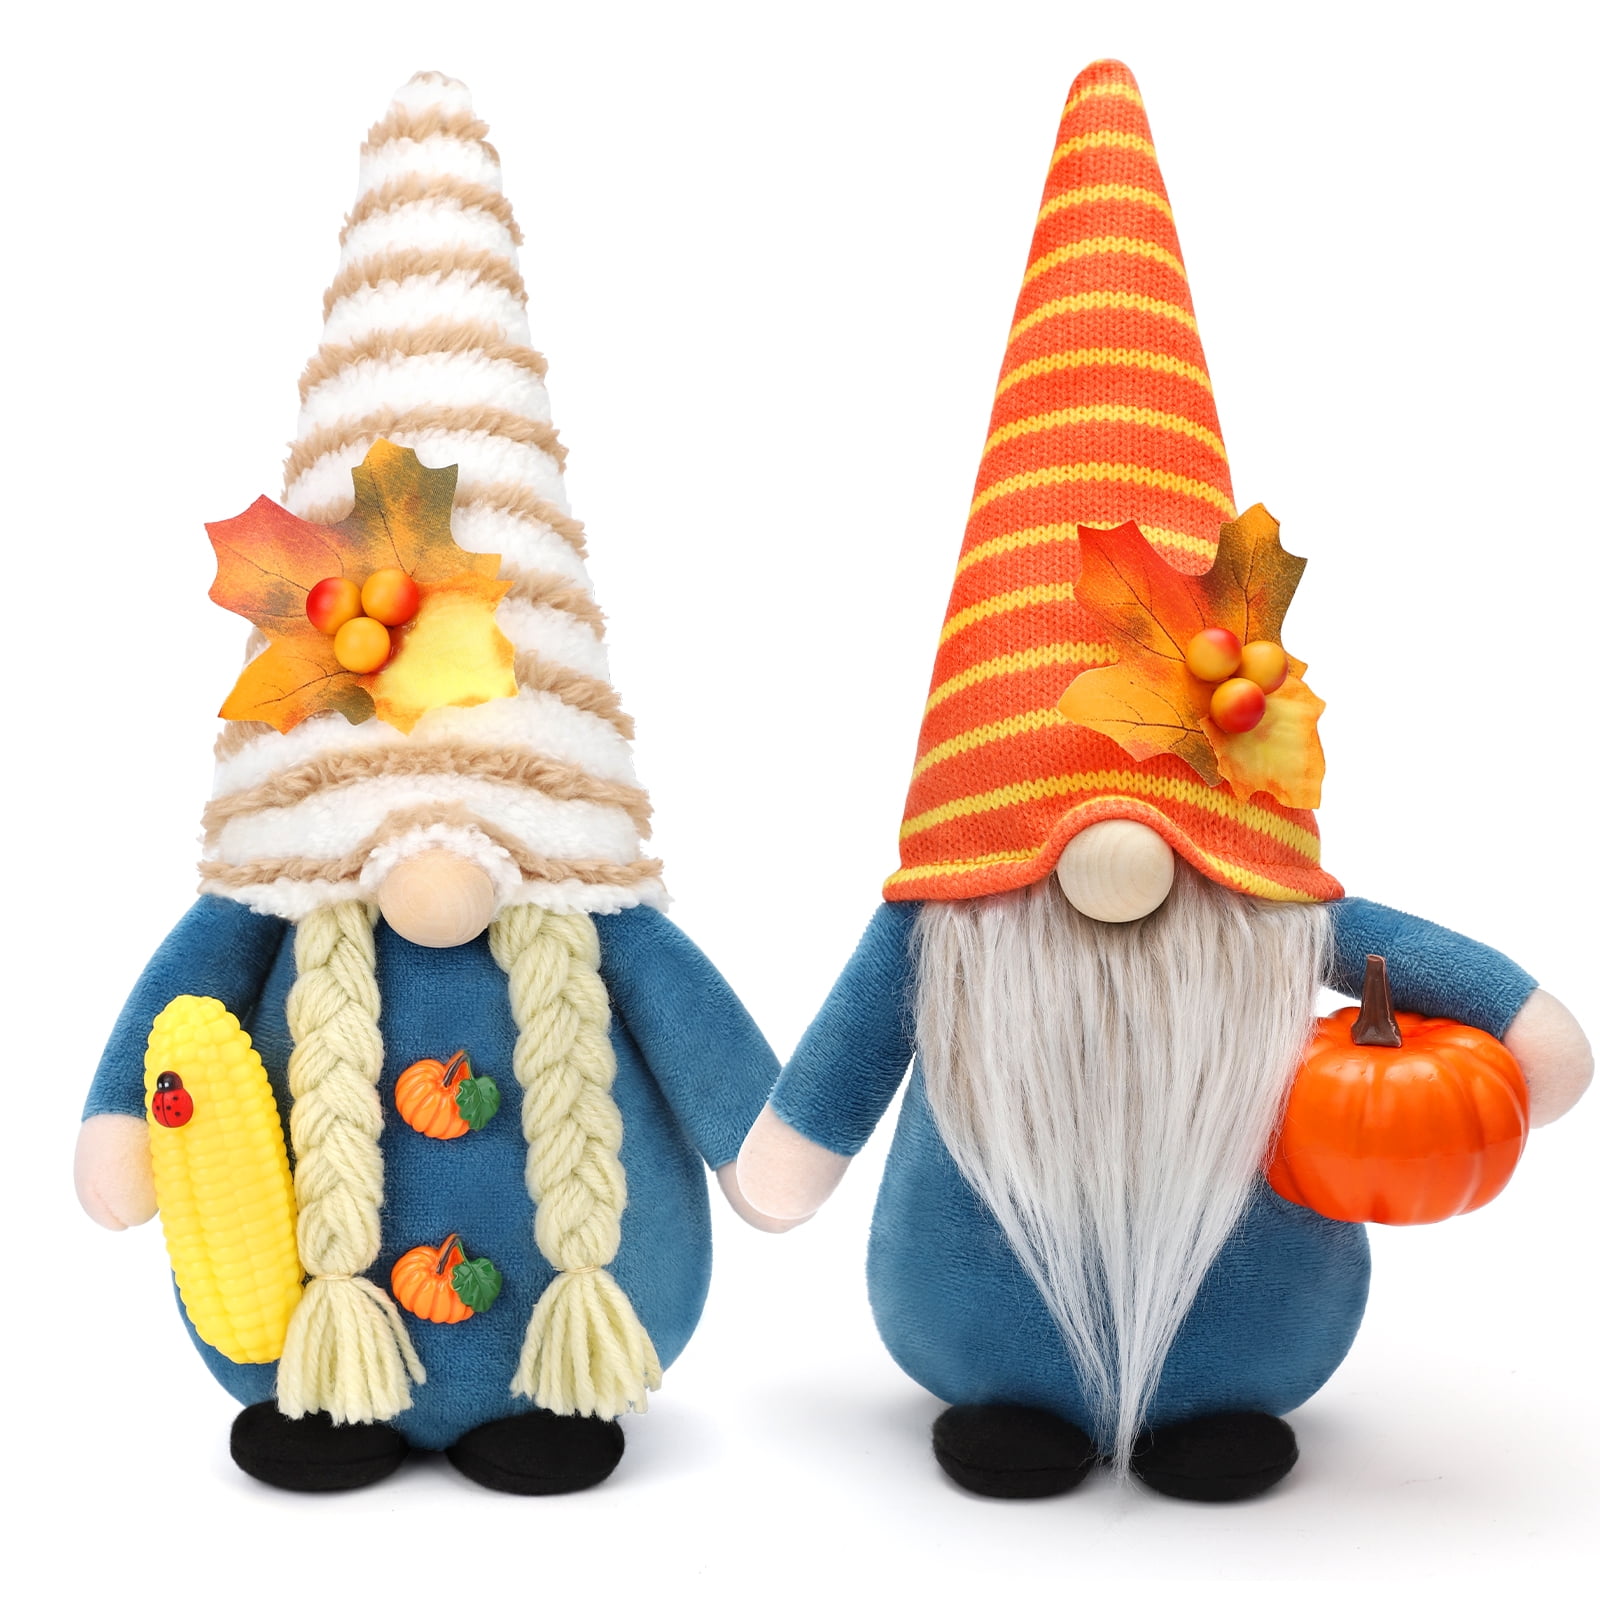 Ayieyill Thanksgiving Gnome Decorations, 2Pack Handmade Fall Harvest ...